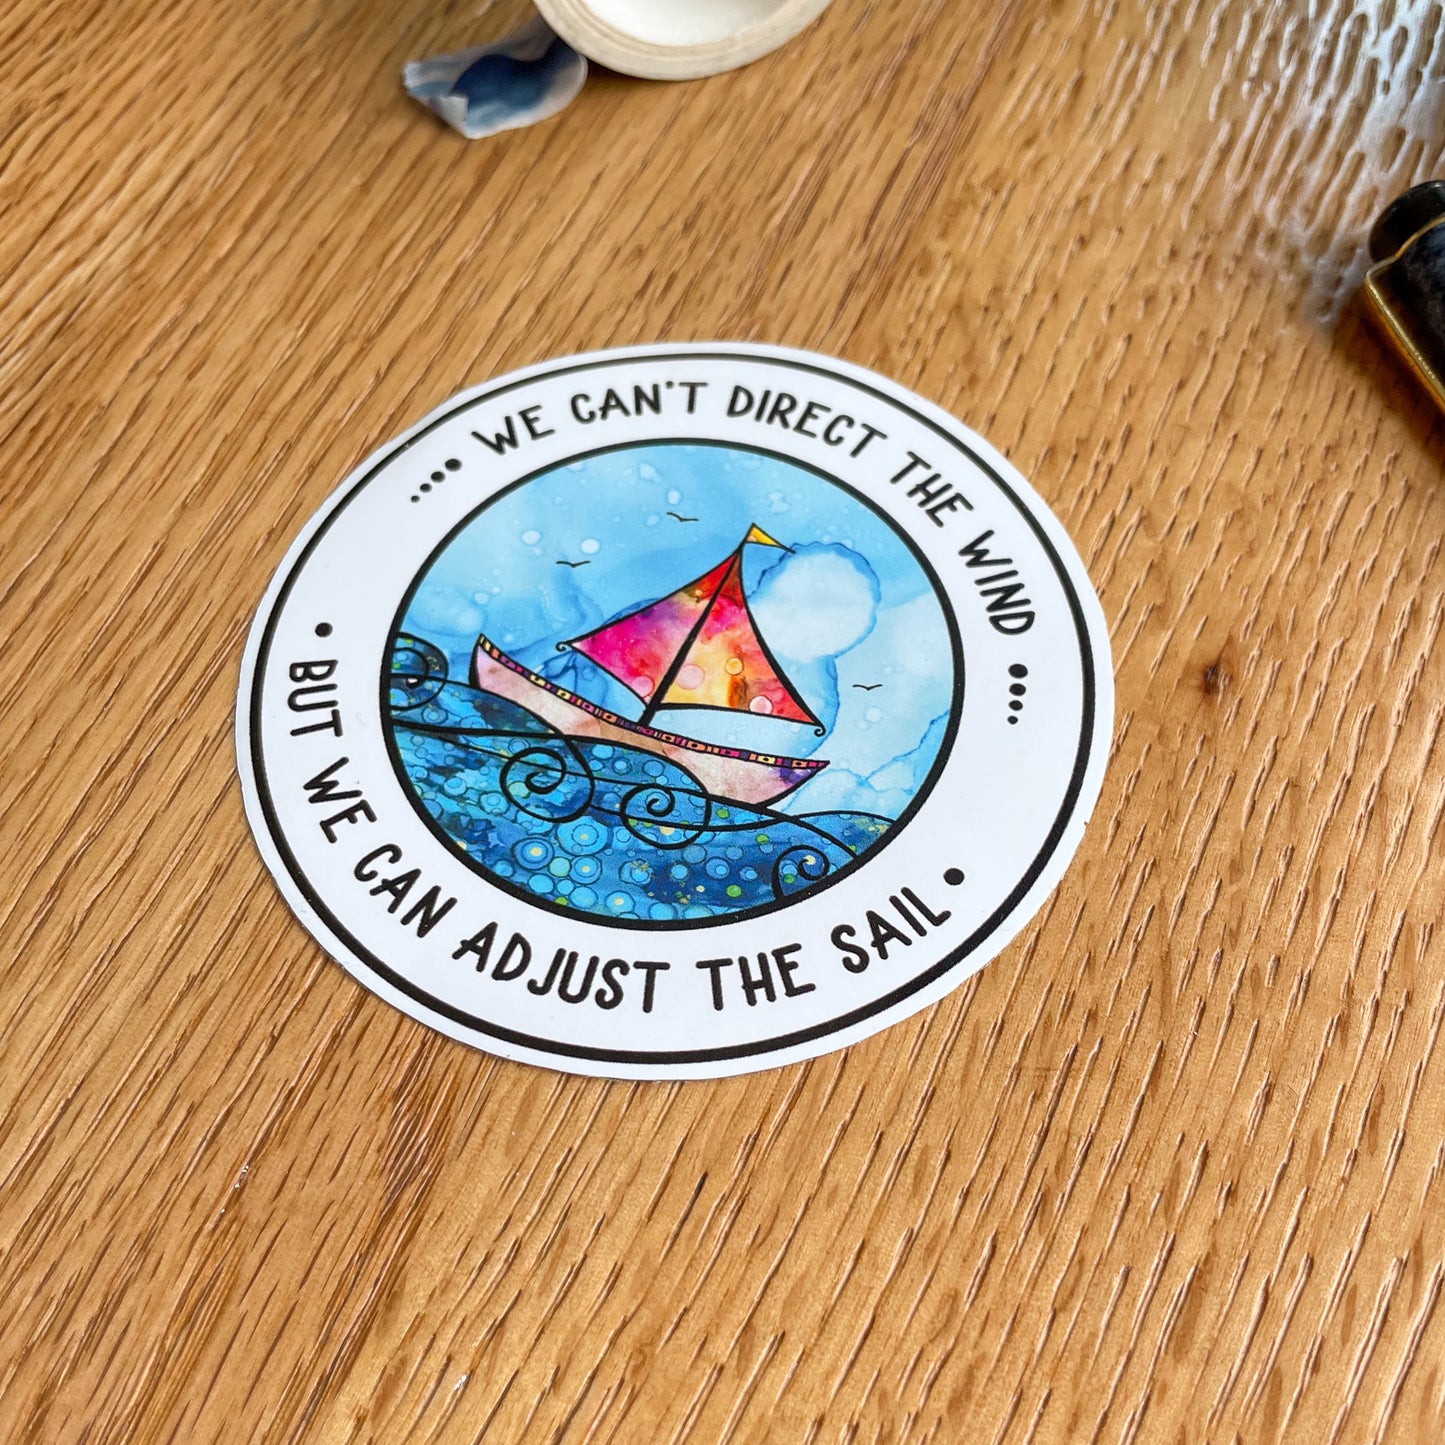 Inspiring vinyl sticker featuring a sailing boat - a constant reminder that you have the power to overcome any obstacle.